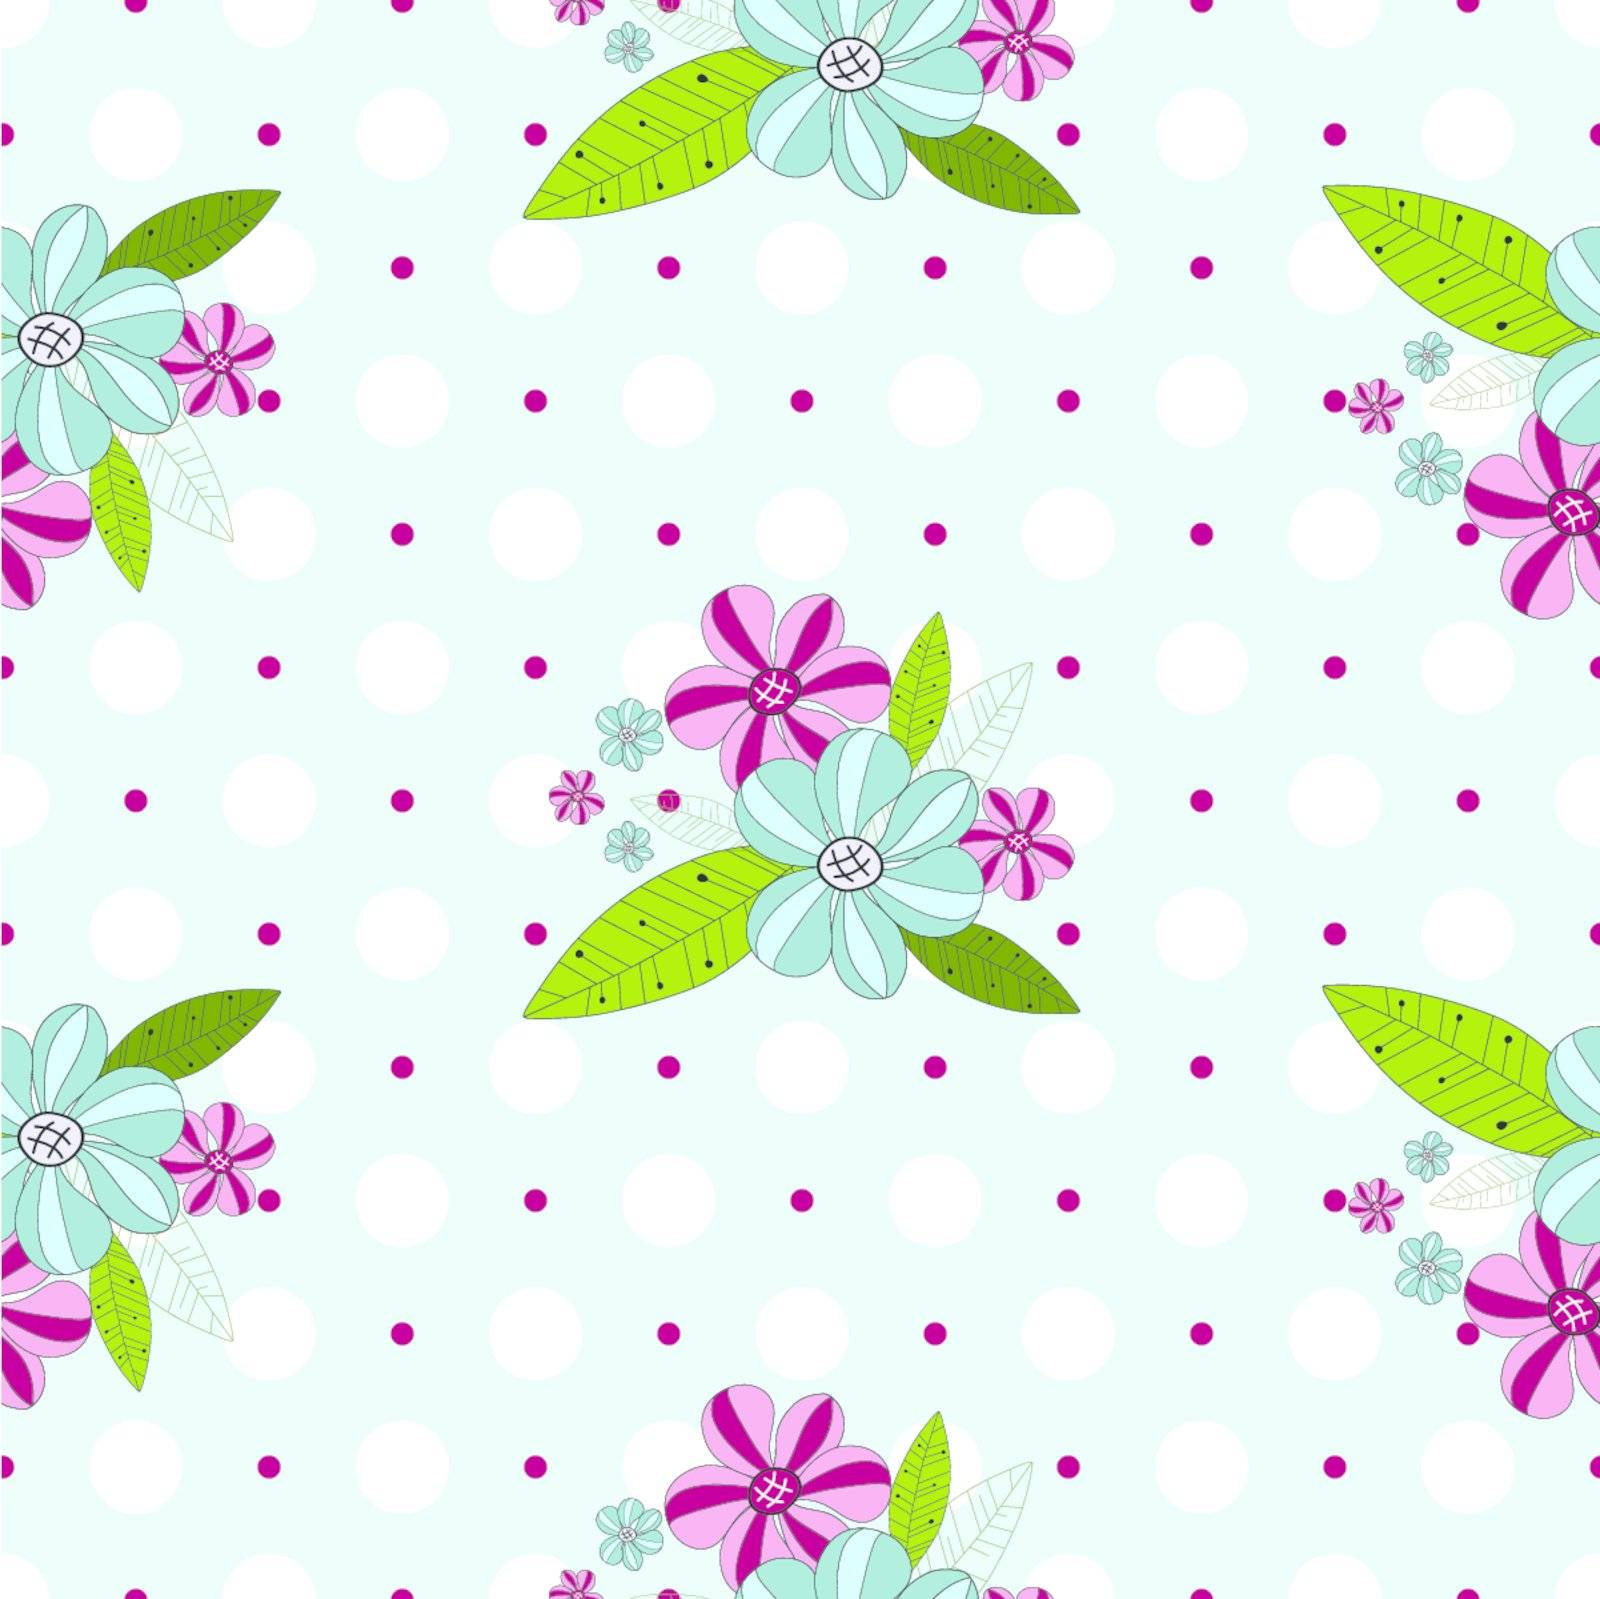 Seamless gentle floral pattern with white peas (vector)